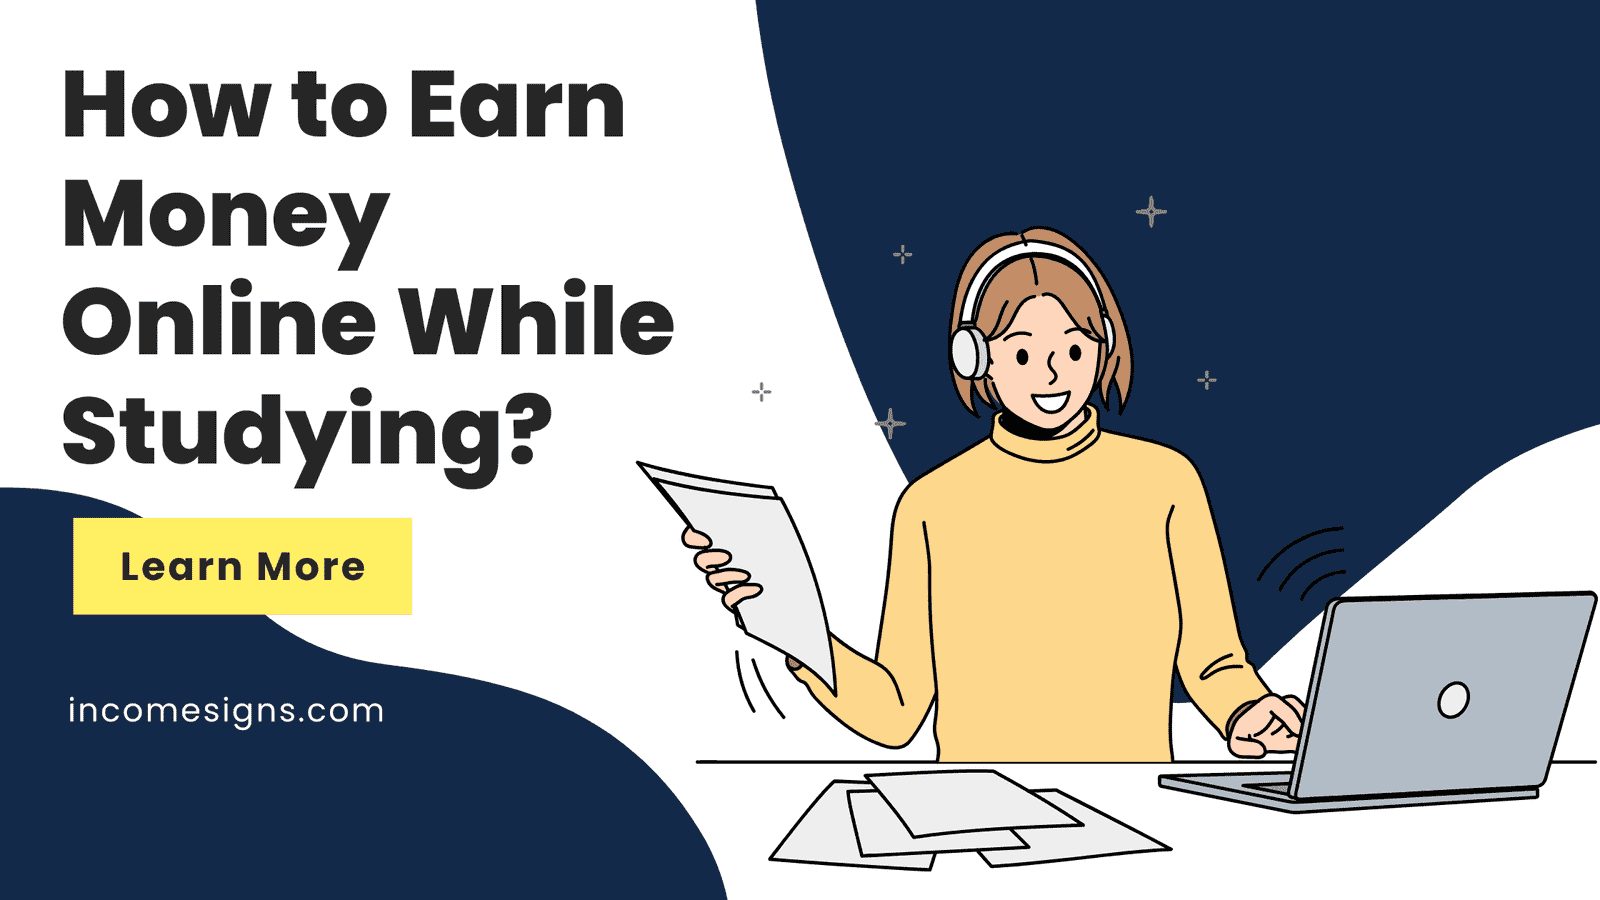 How to Earn Money Online While Studying - Income Signs